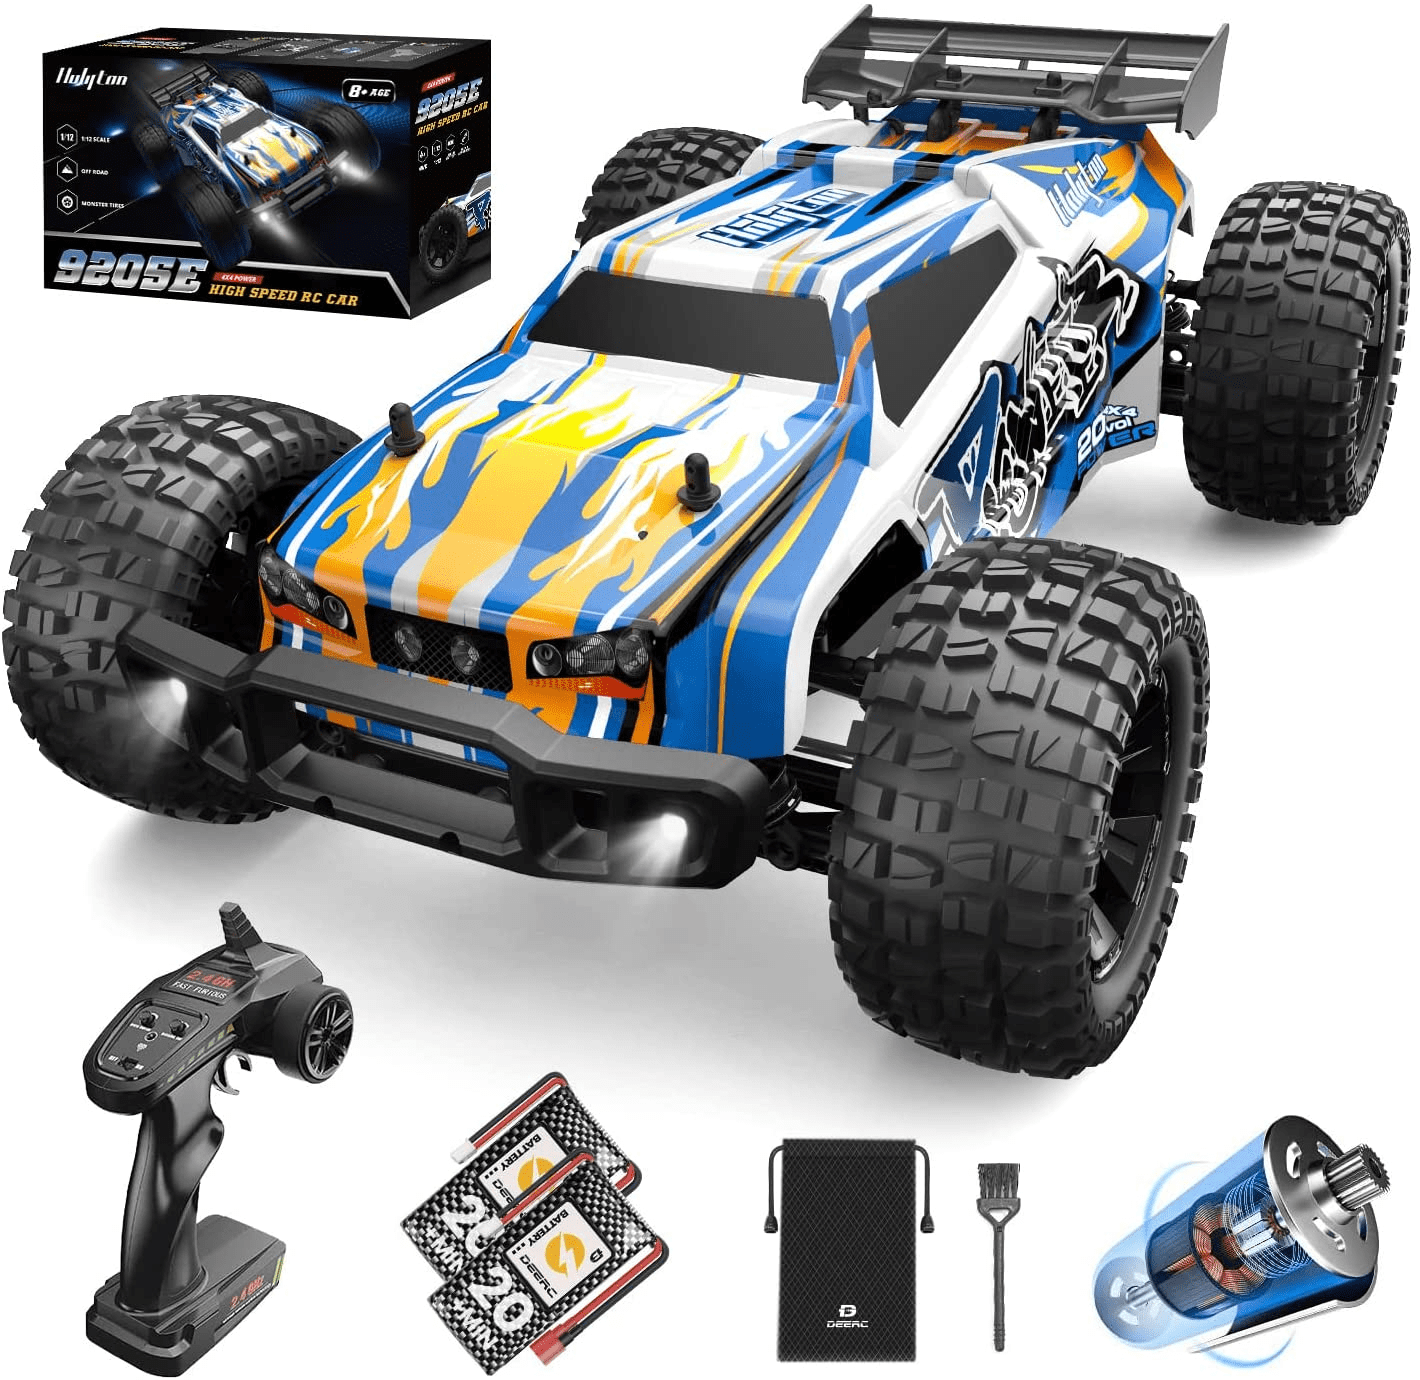 Coedfa RC Military Truck 1:16 Run for 20mins Car Toy Off-Road Sport Cars Toys 2.4G 4WD with 8 Tires Rock Crawler Vehicle Gifts with Transmitter Control for Kids Children USB Charged 